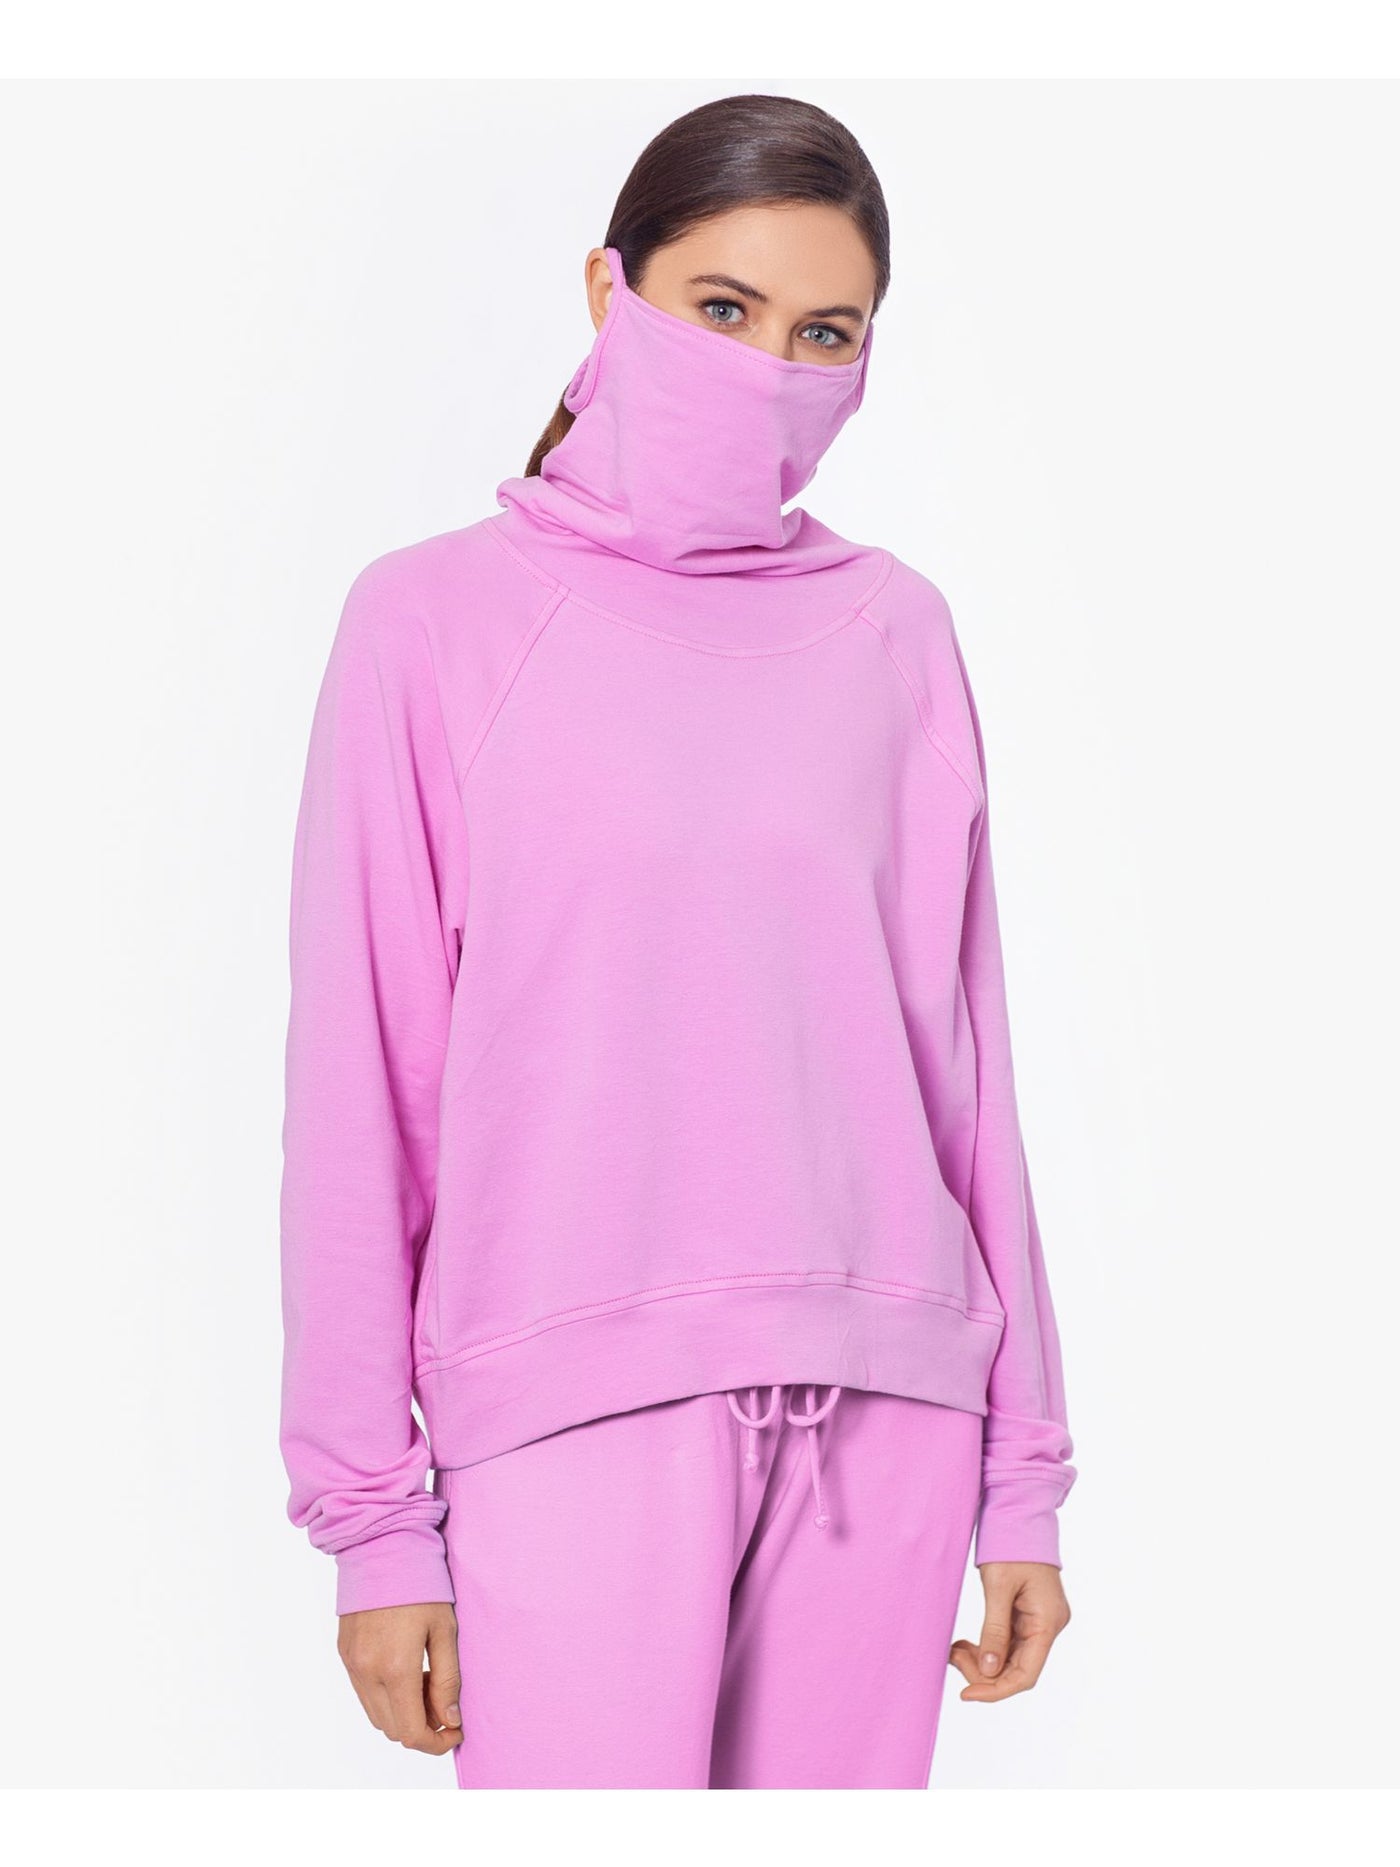 BAM BY BETSY & ADAM Womens Pink Stretch Pocketed Built-in Mask Long Sleeve Crew Neck Sweater M